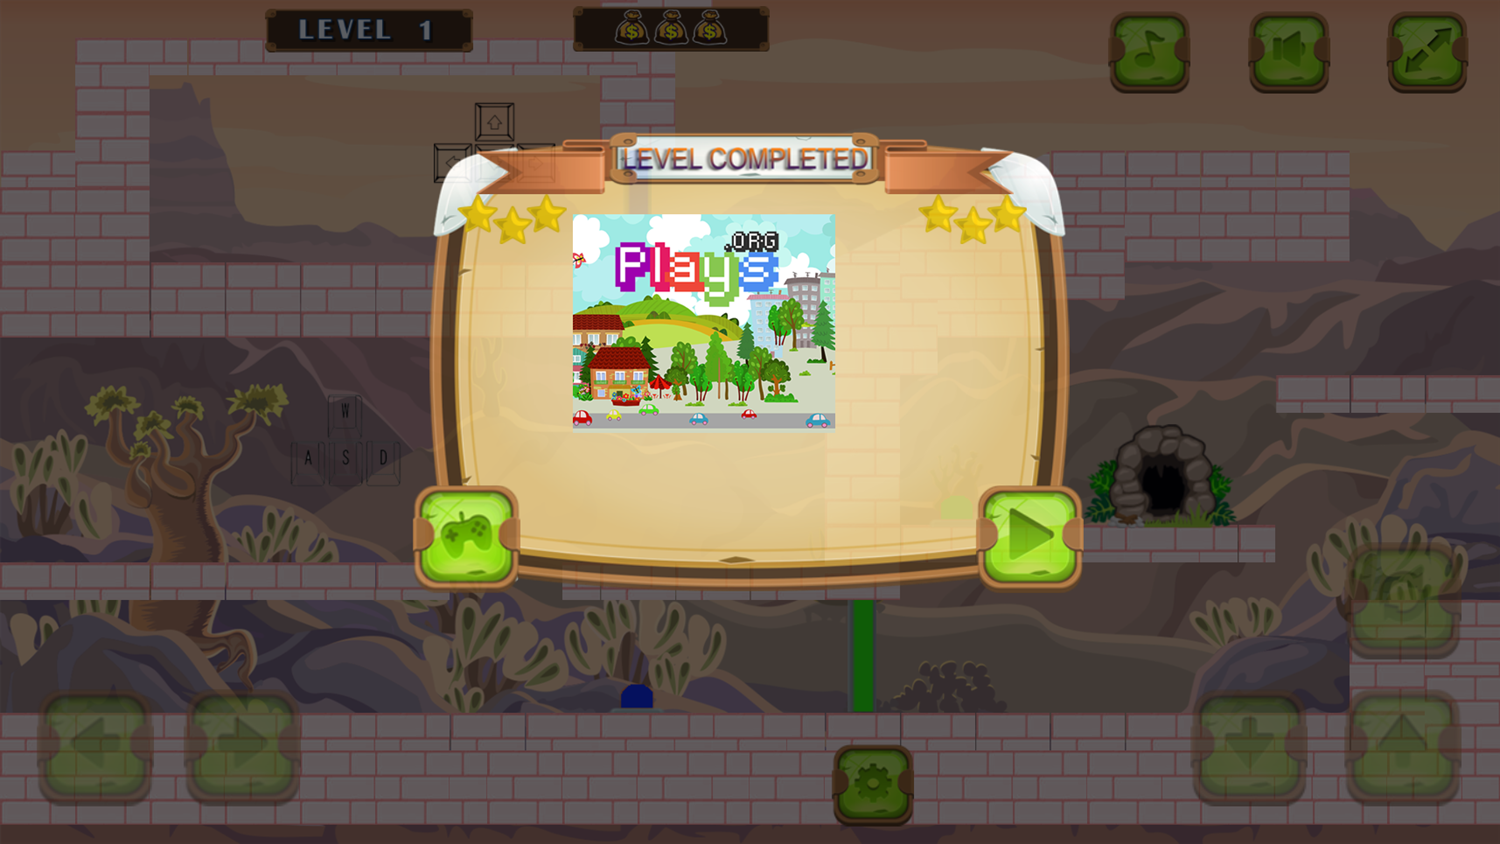 Toto Double Trouble Game Level Completed Screenshot.